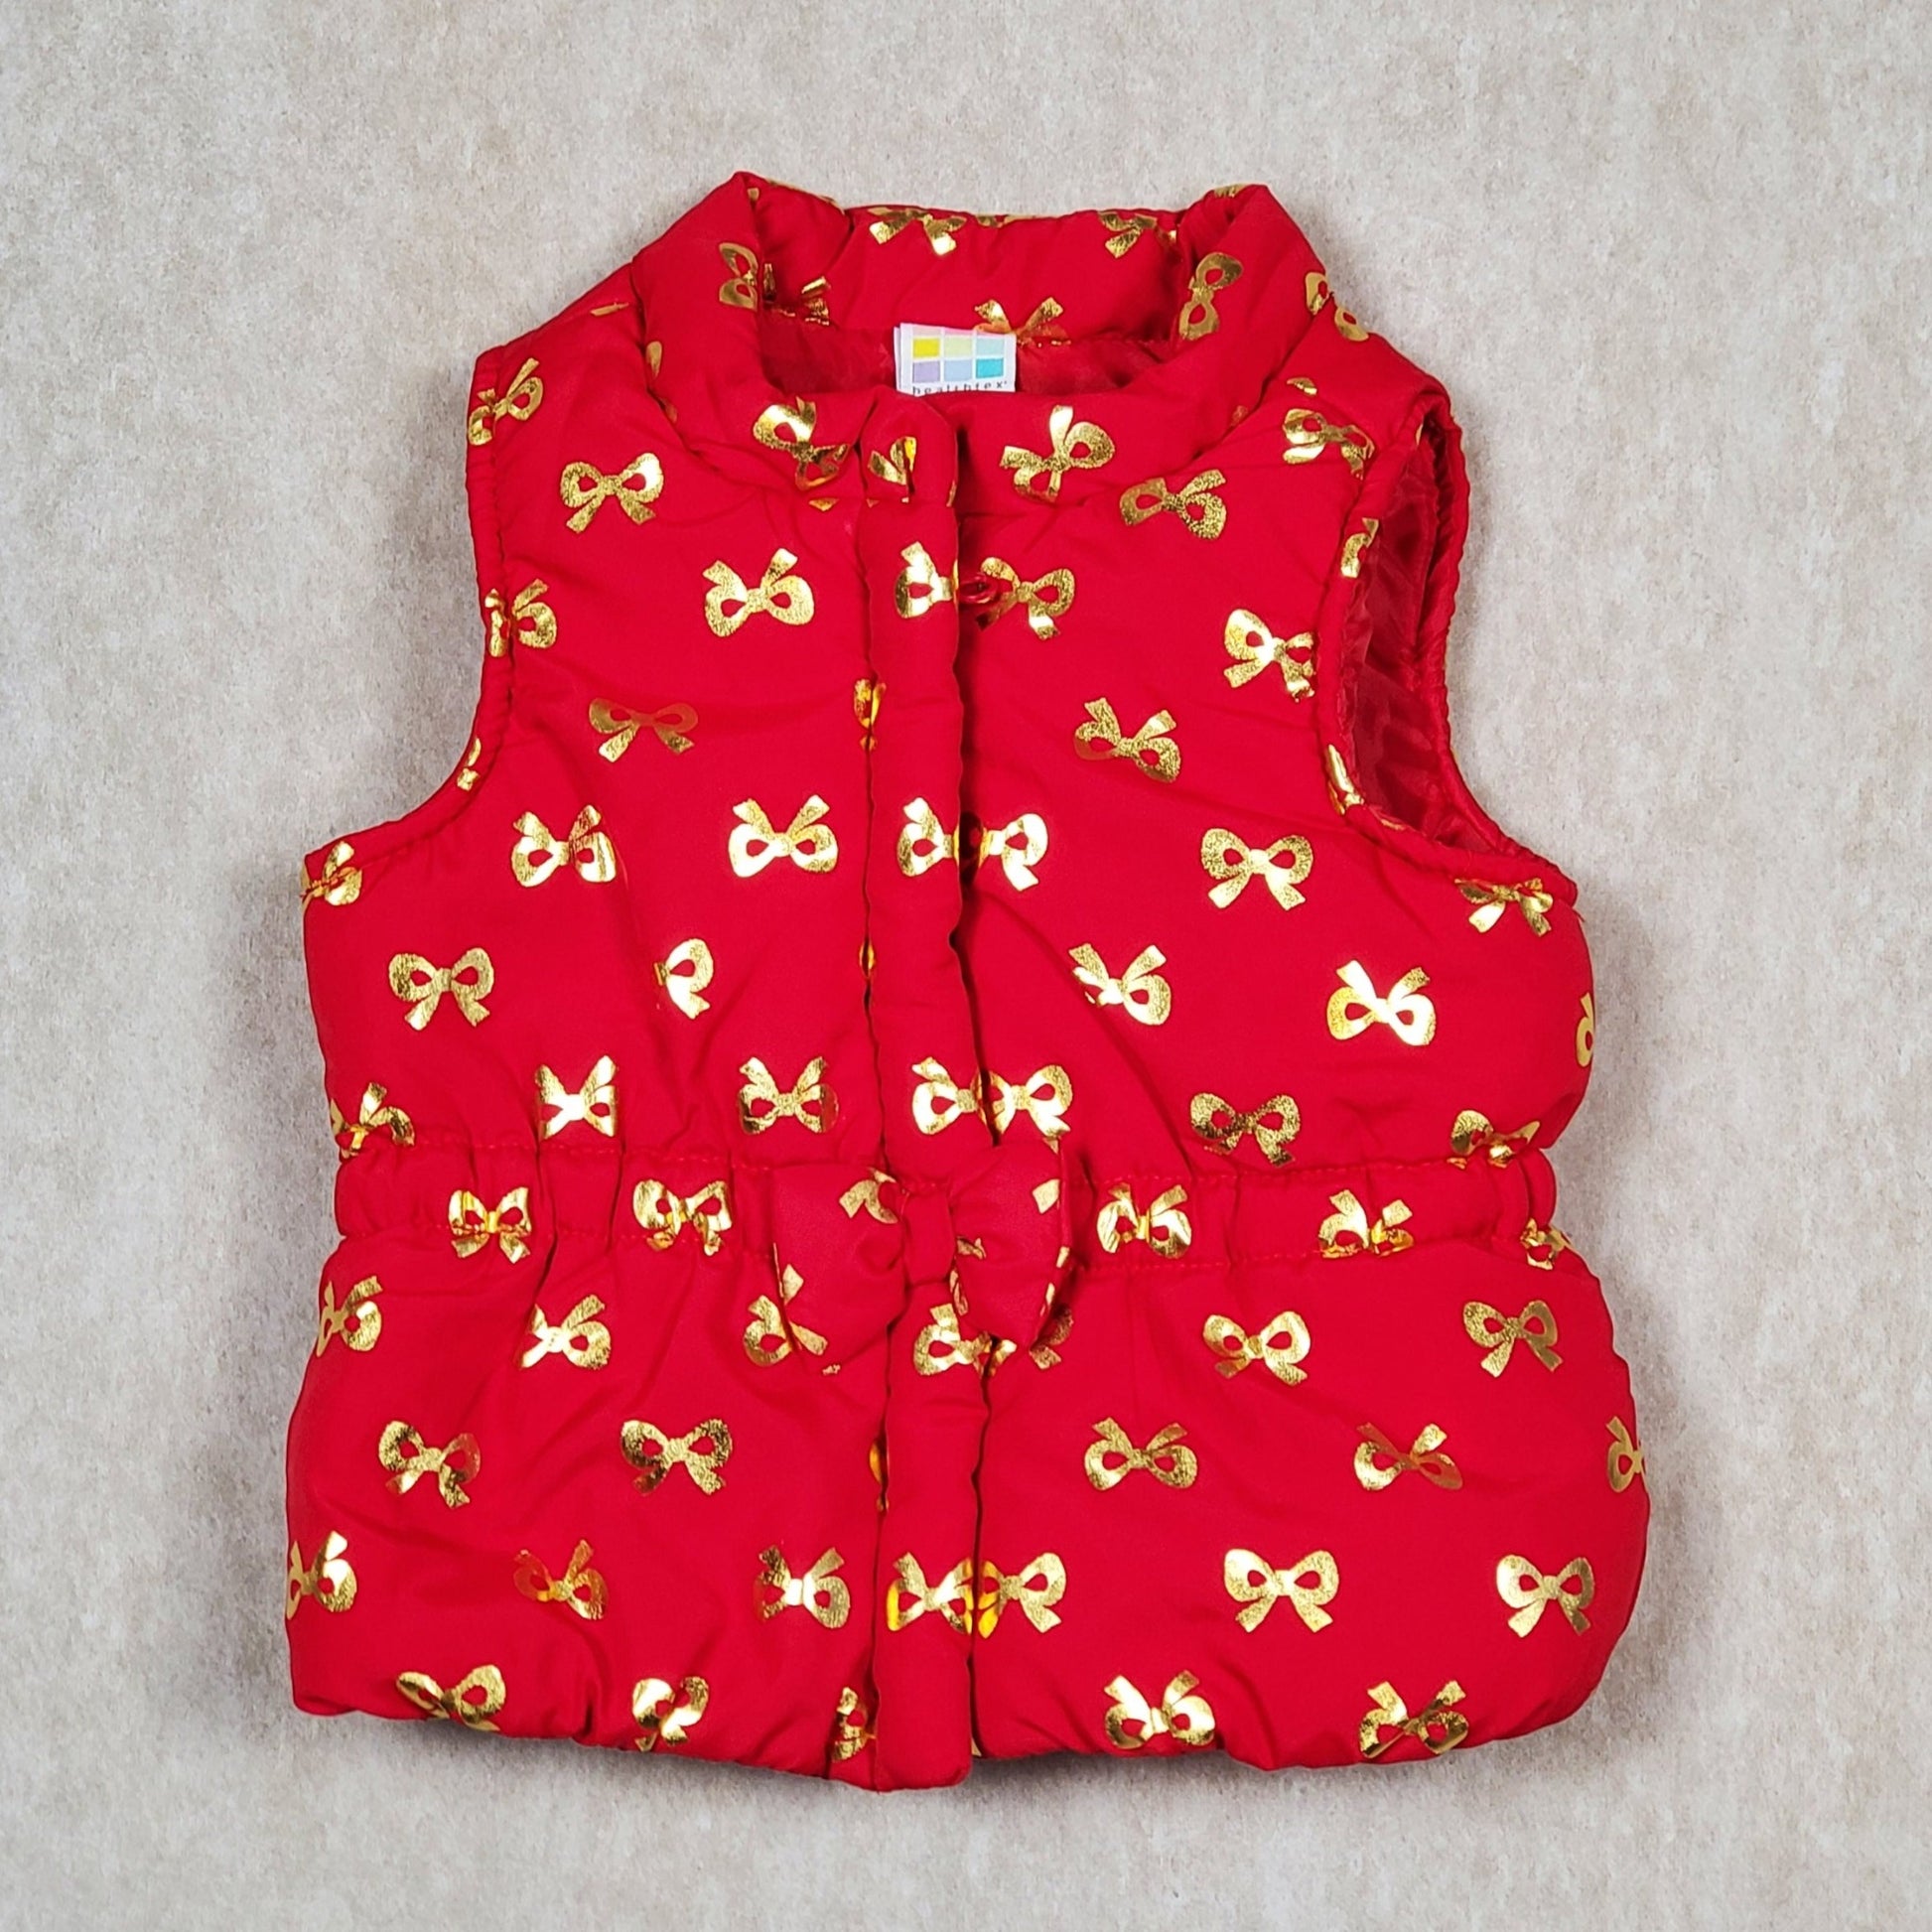 Healthtex Girls Red Bow Print Puffer Vest 6M Used View 1